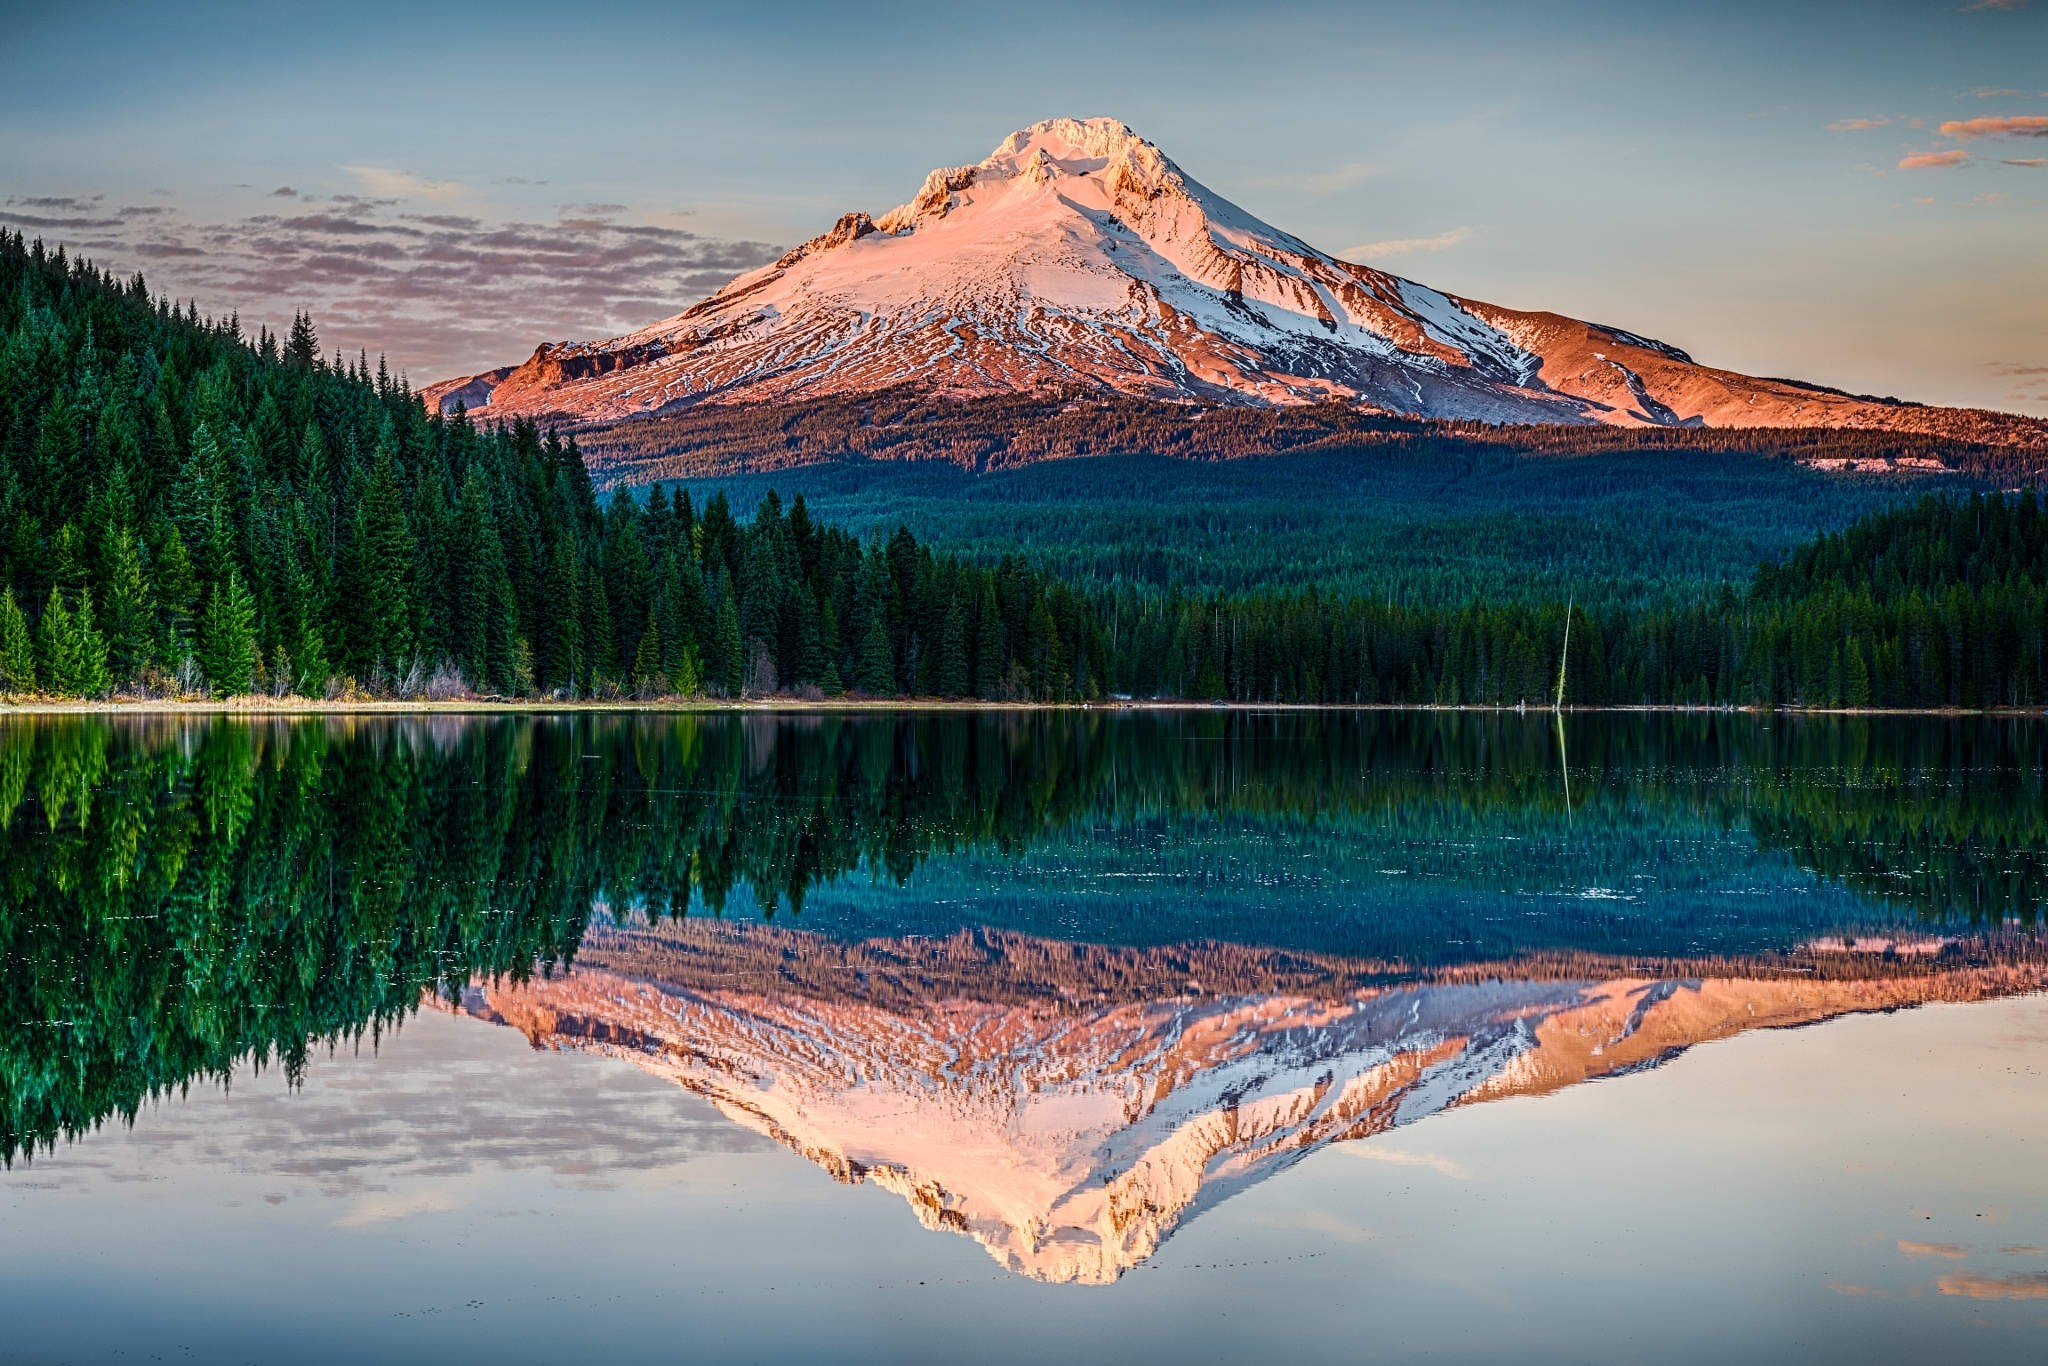 General 2048x1366 nature landscape snowy peak mountains sunset forest lake water reflection Oregon calm trees USA